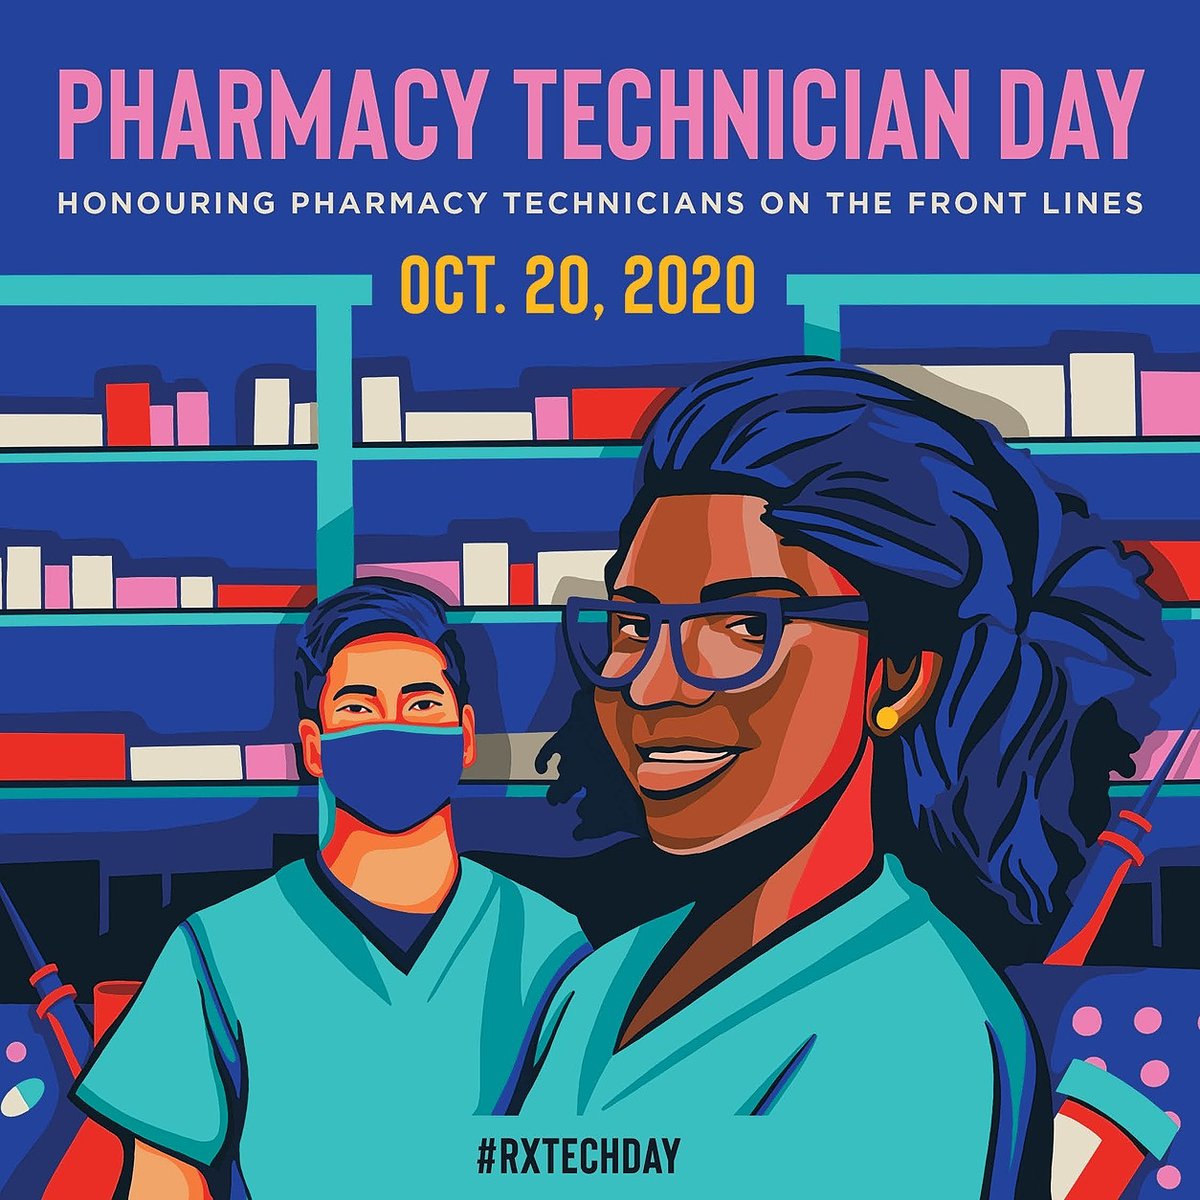 Happy Pharmacy Technician Day! #PharmacyTechnician: Funded training is available to grow your Accuracy Checking skills. Find out more: #RxTechDay @APTUK1 Sami Walker shares her experience: orlo.uk/uN9t9